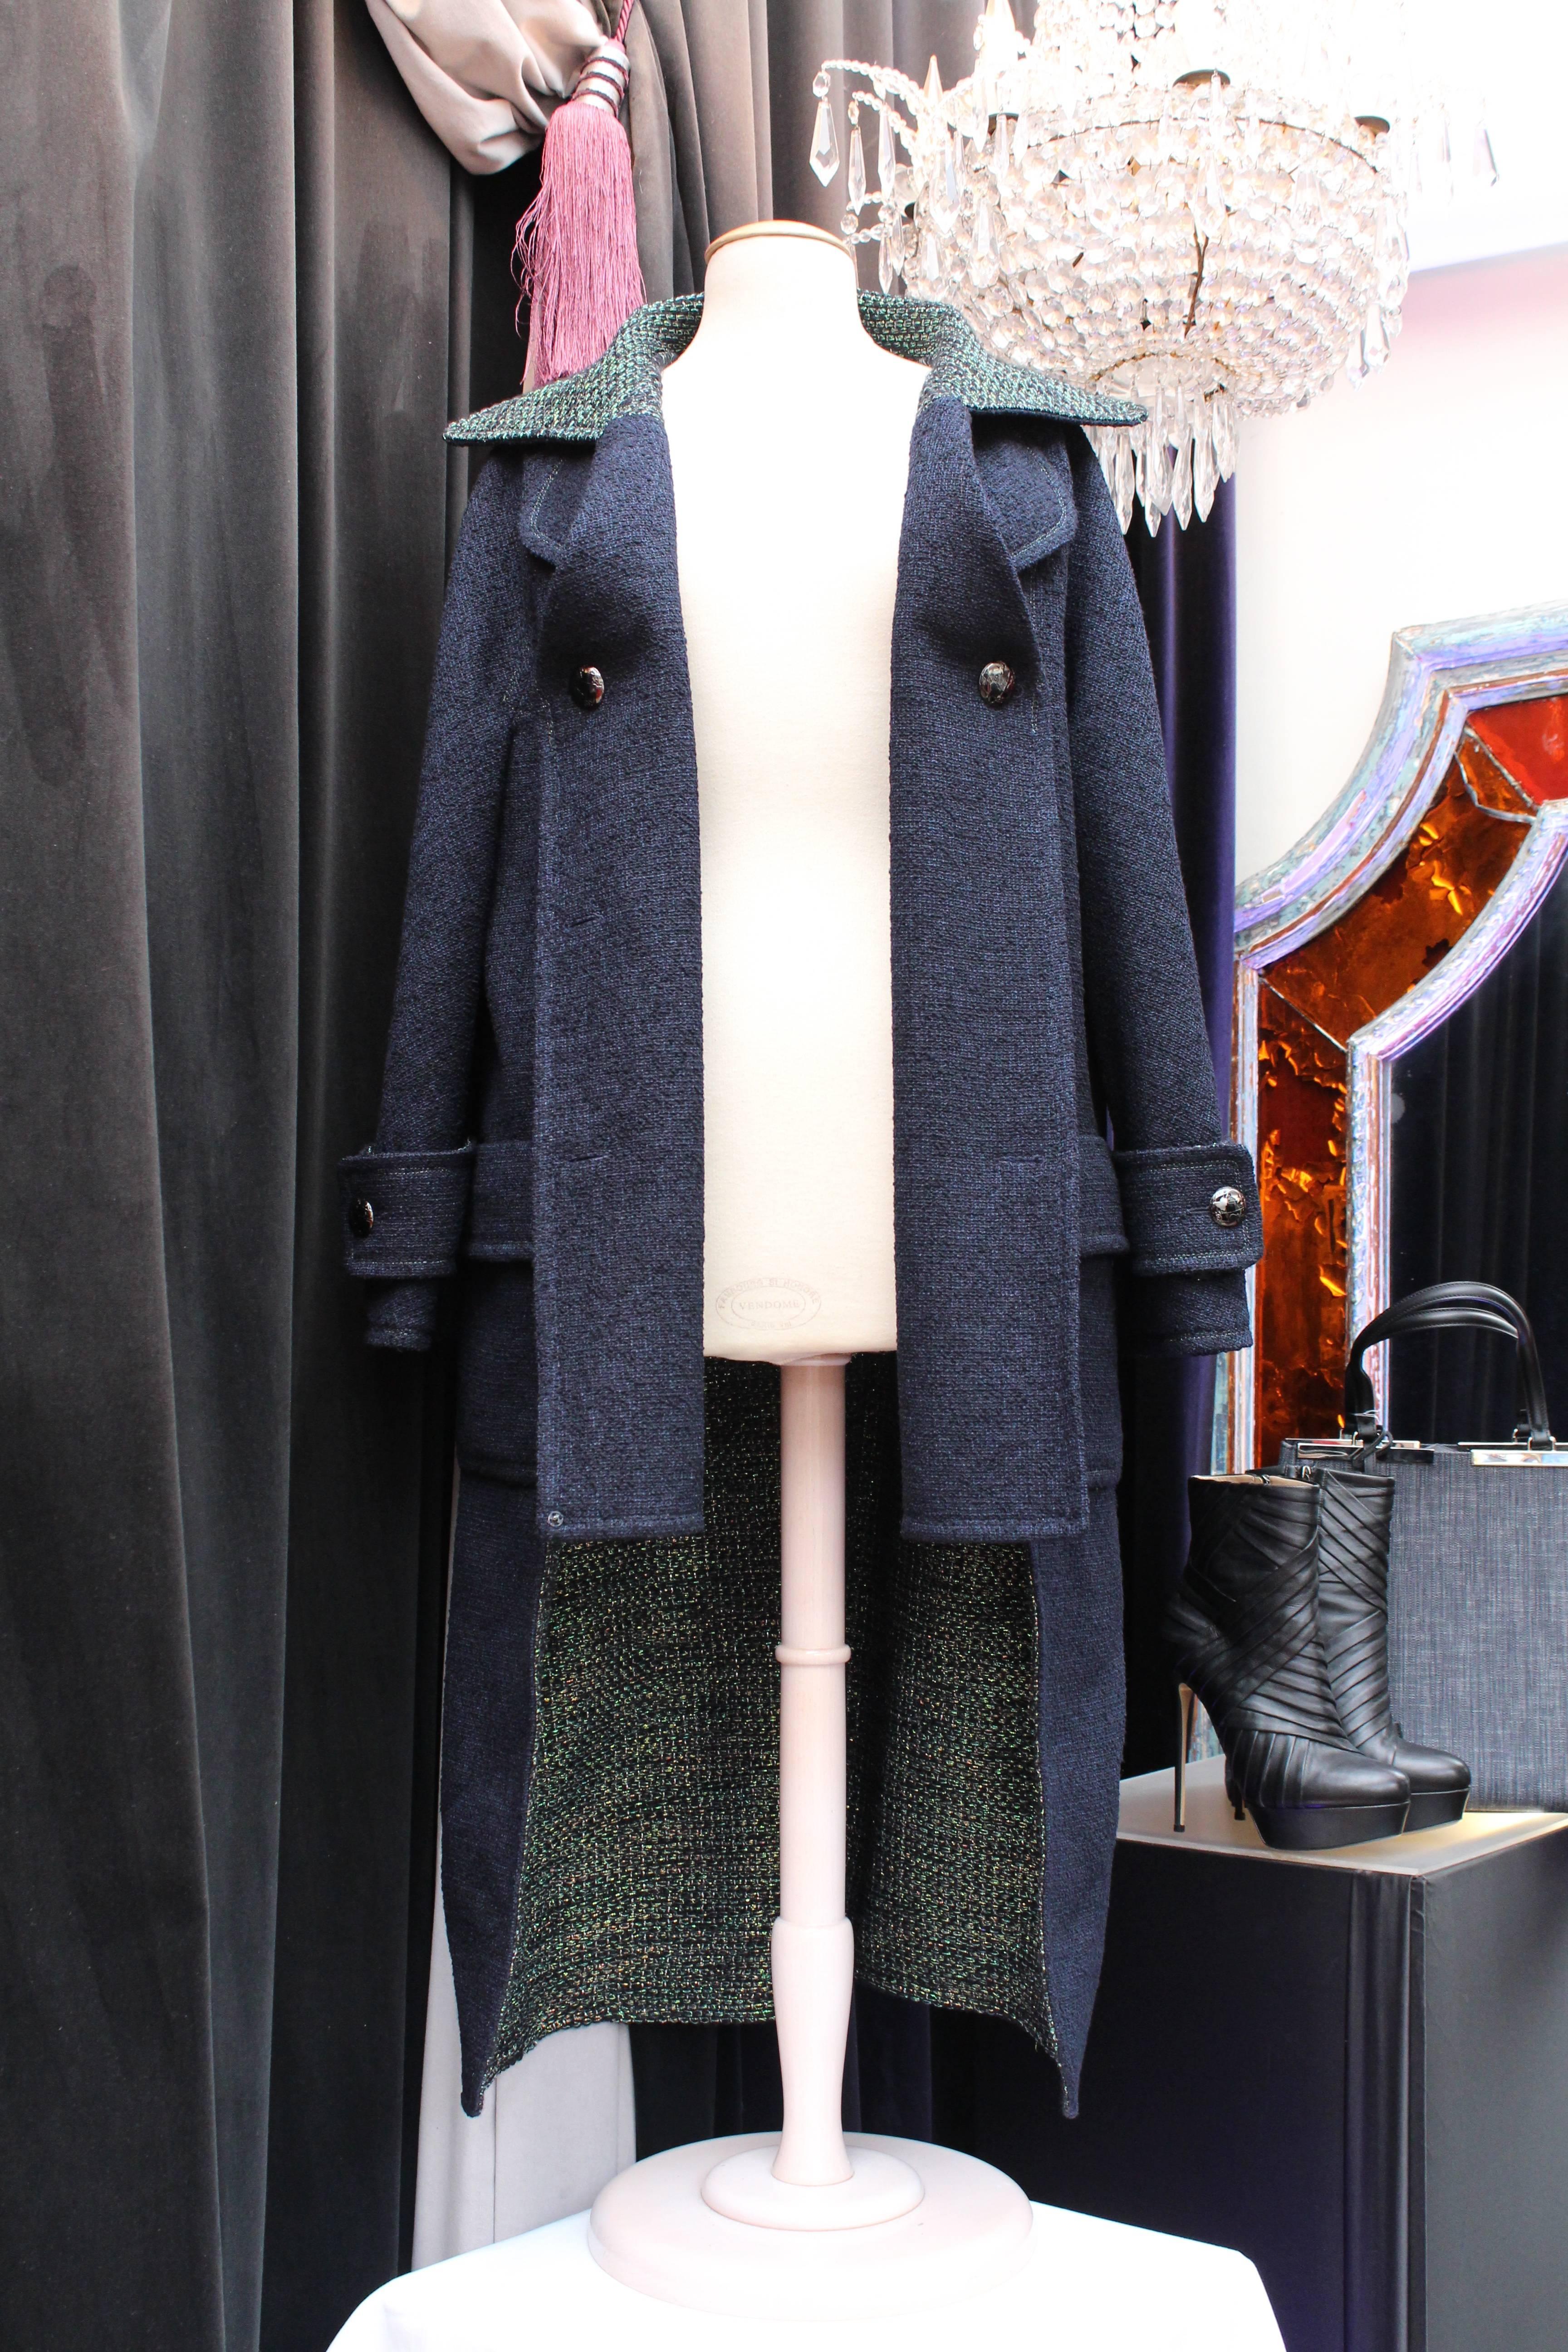 Black Fall 2013 Chanel Coat in Navy Blue and Iridescent Green Wool Tweed